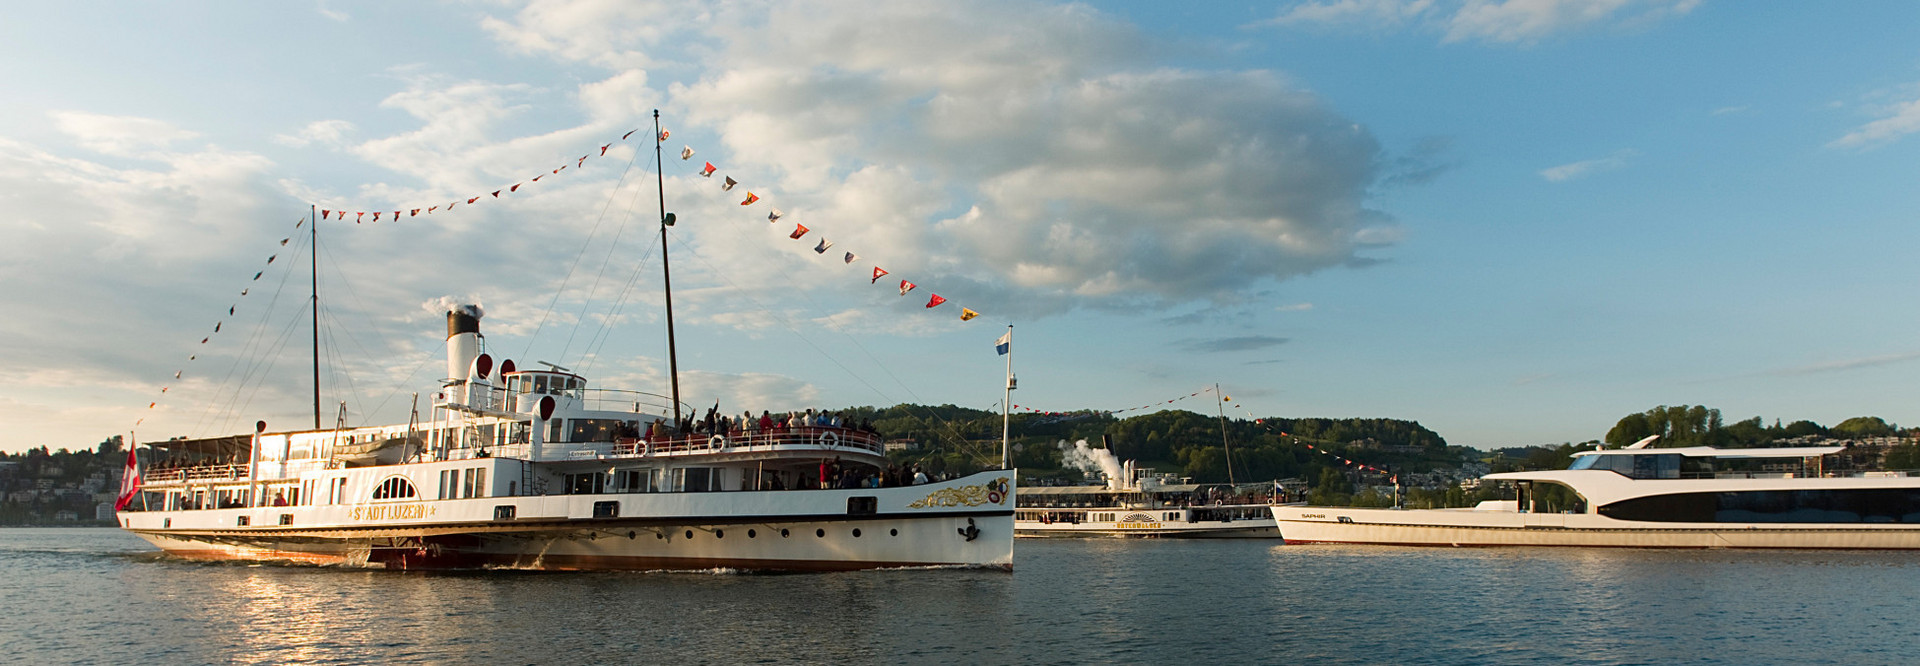 A steamboat and a motor vessel cross each other on Lake Lucerne.